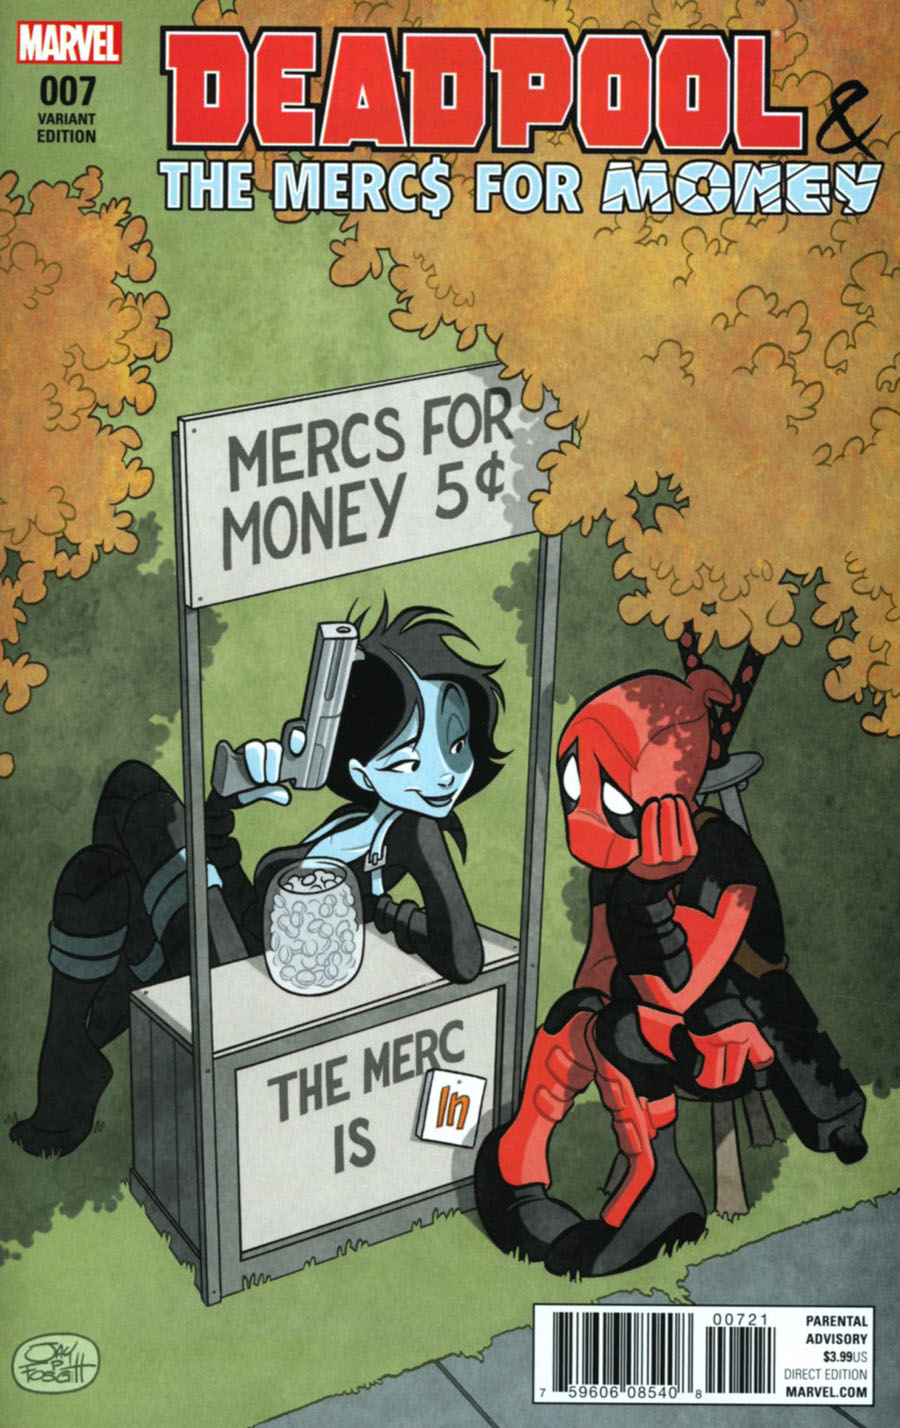 Deadpool And The Mercs For Money Vol 2 #7 Cover B Incentive Variant Cover (Inhumans vs X-Men Tie-In)